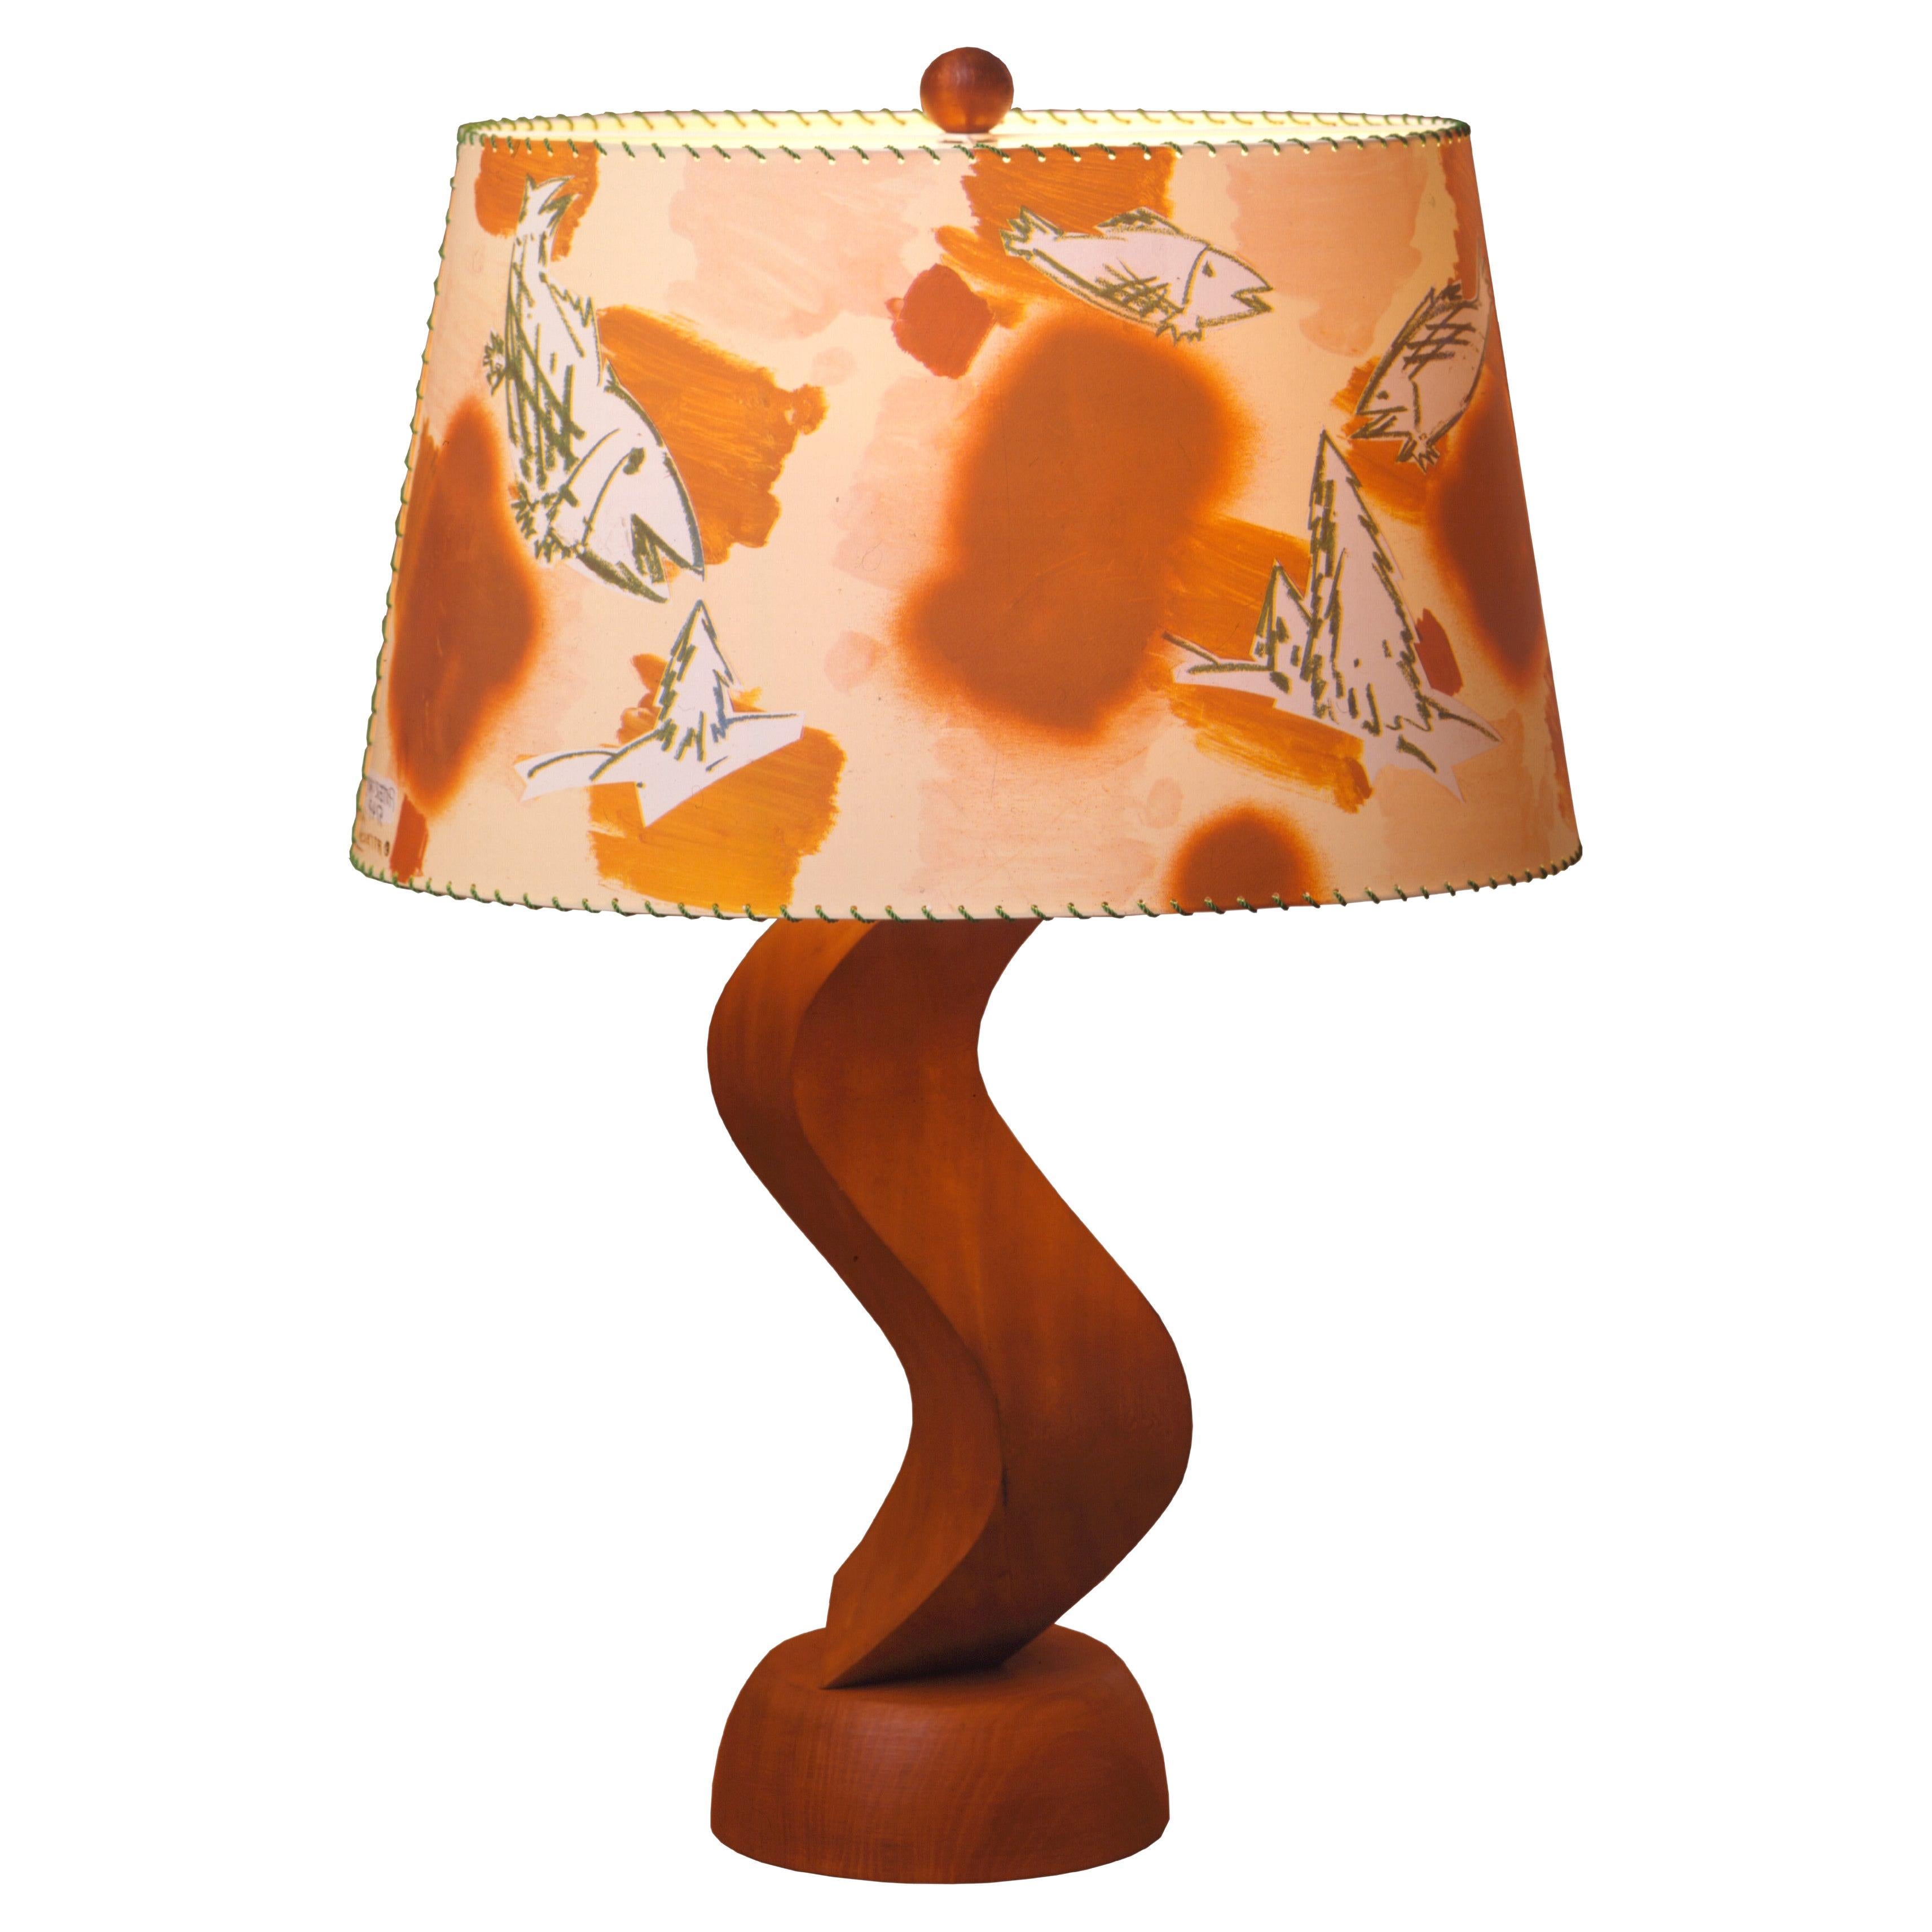 Original Christian Ludwig Attersee 1992 Table Lamp from Woka Art Collection